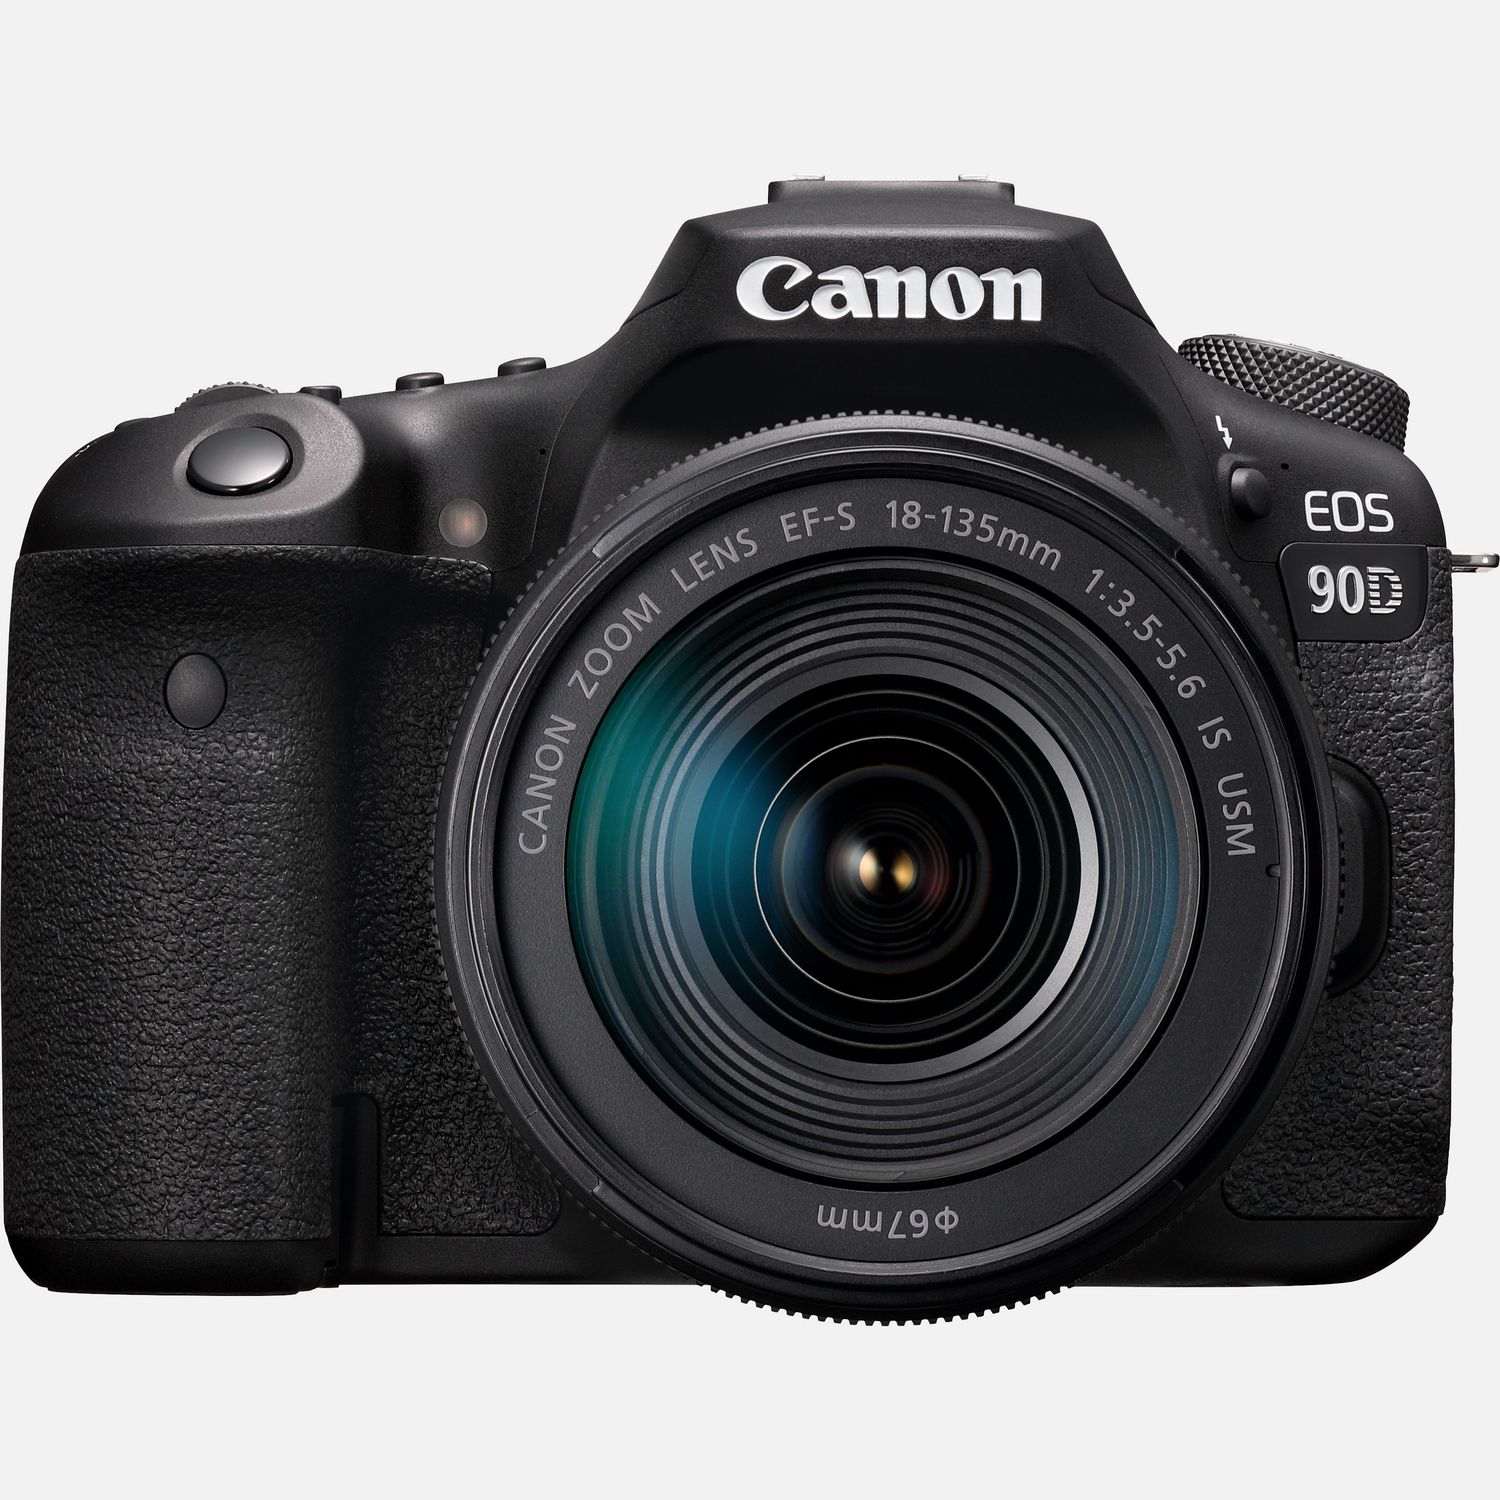 Canon EOS 90D DSLR Camera with 18-135mm f/3.5-5.6 IS USM